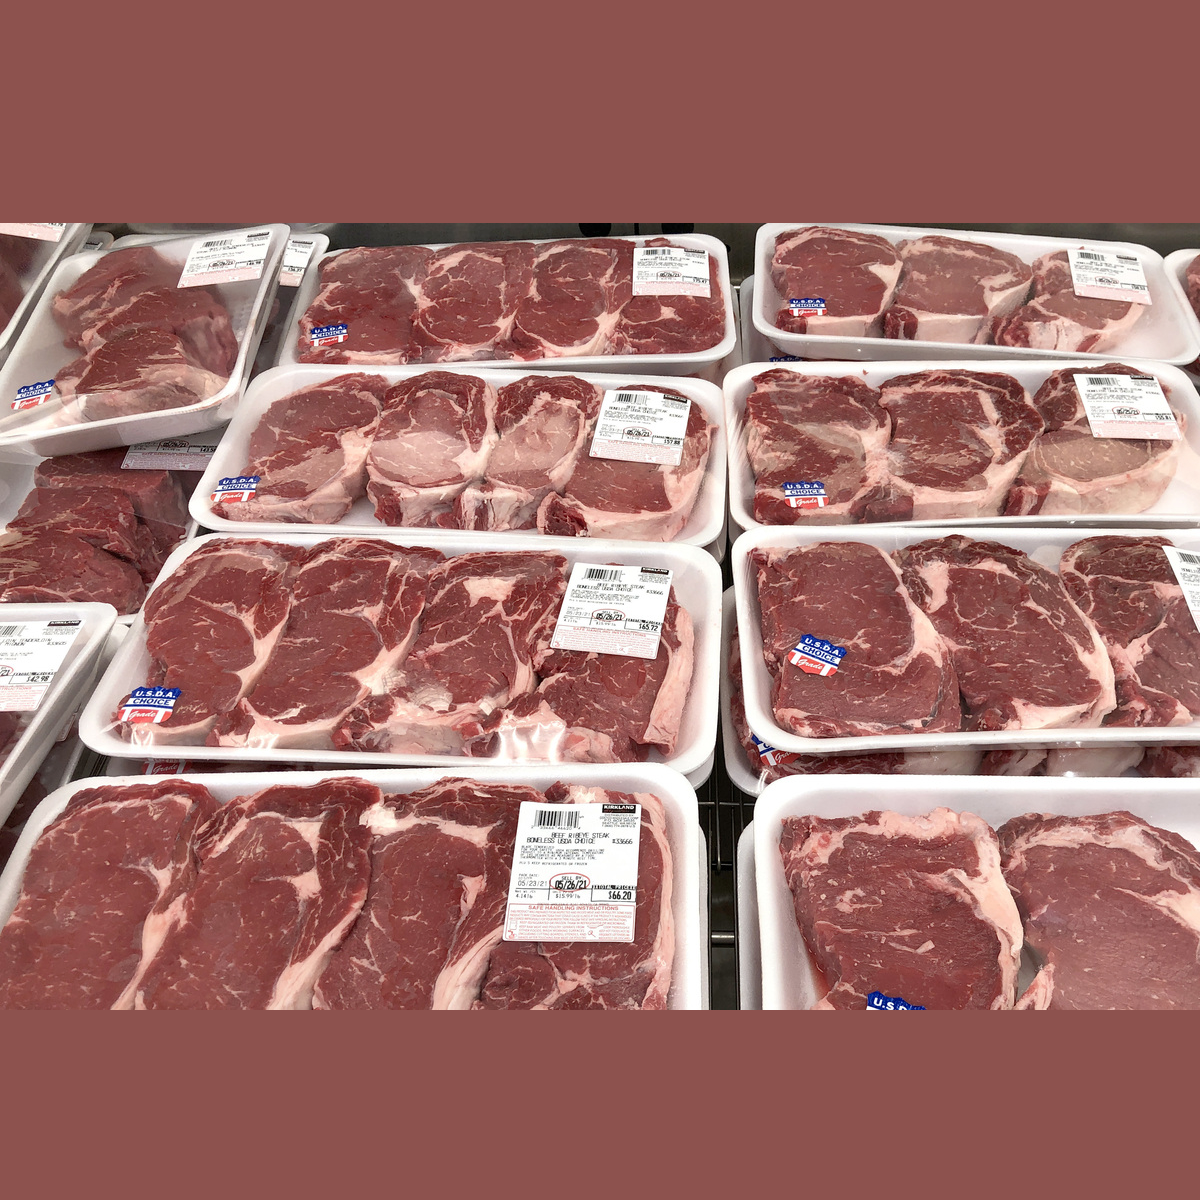 Prices Surge in Beef Market